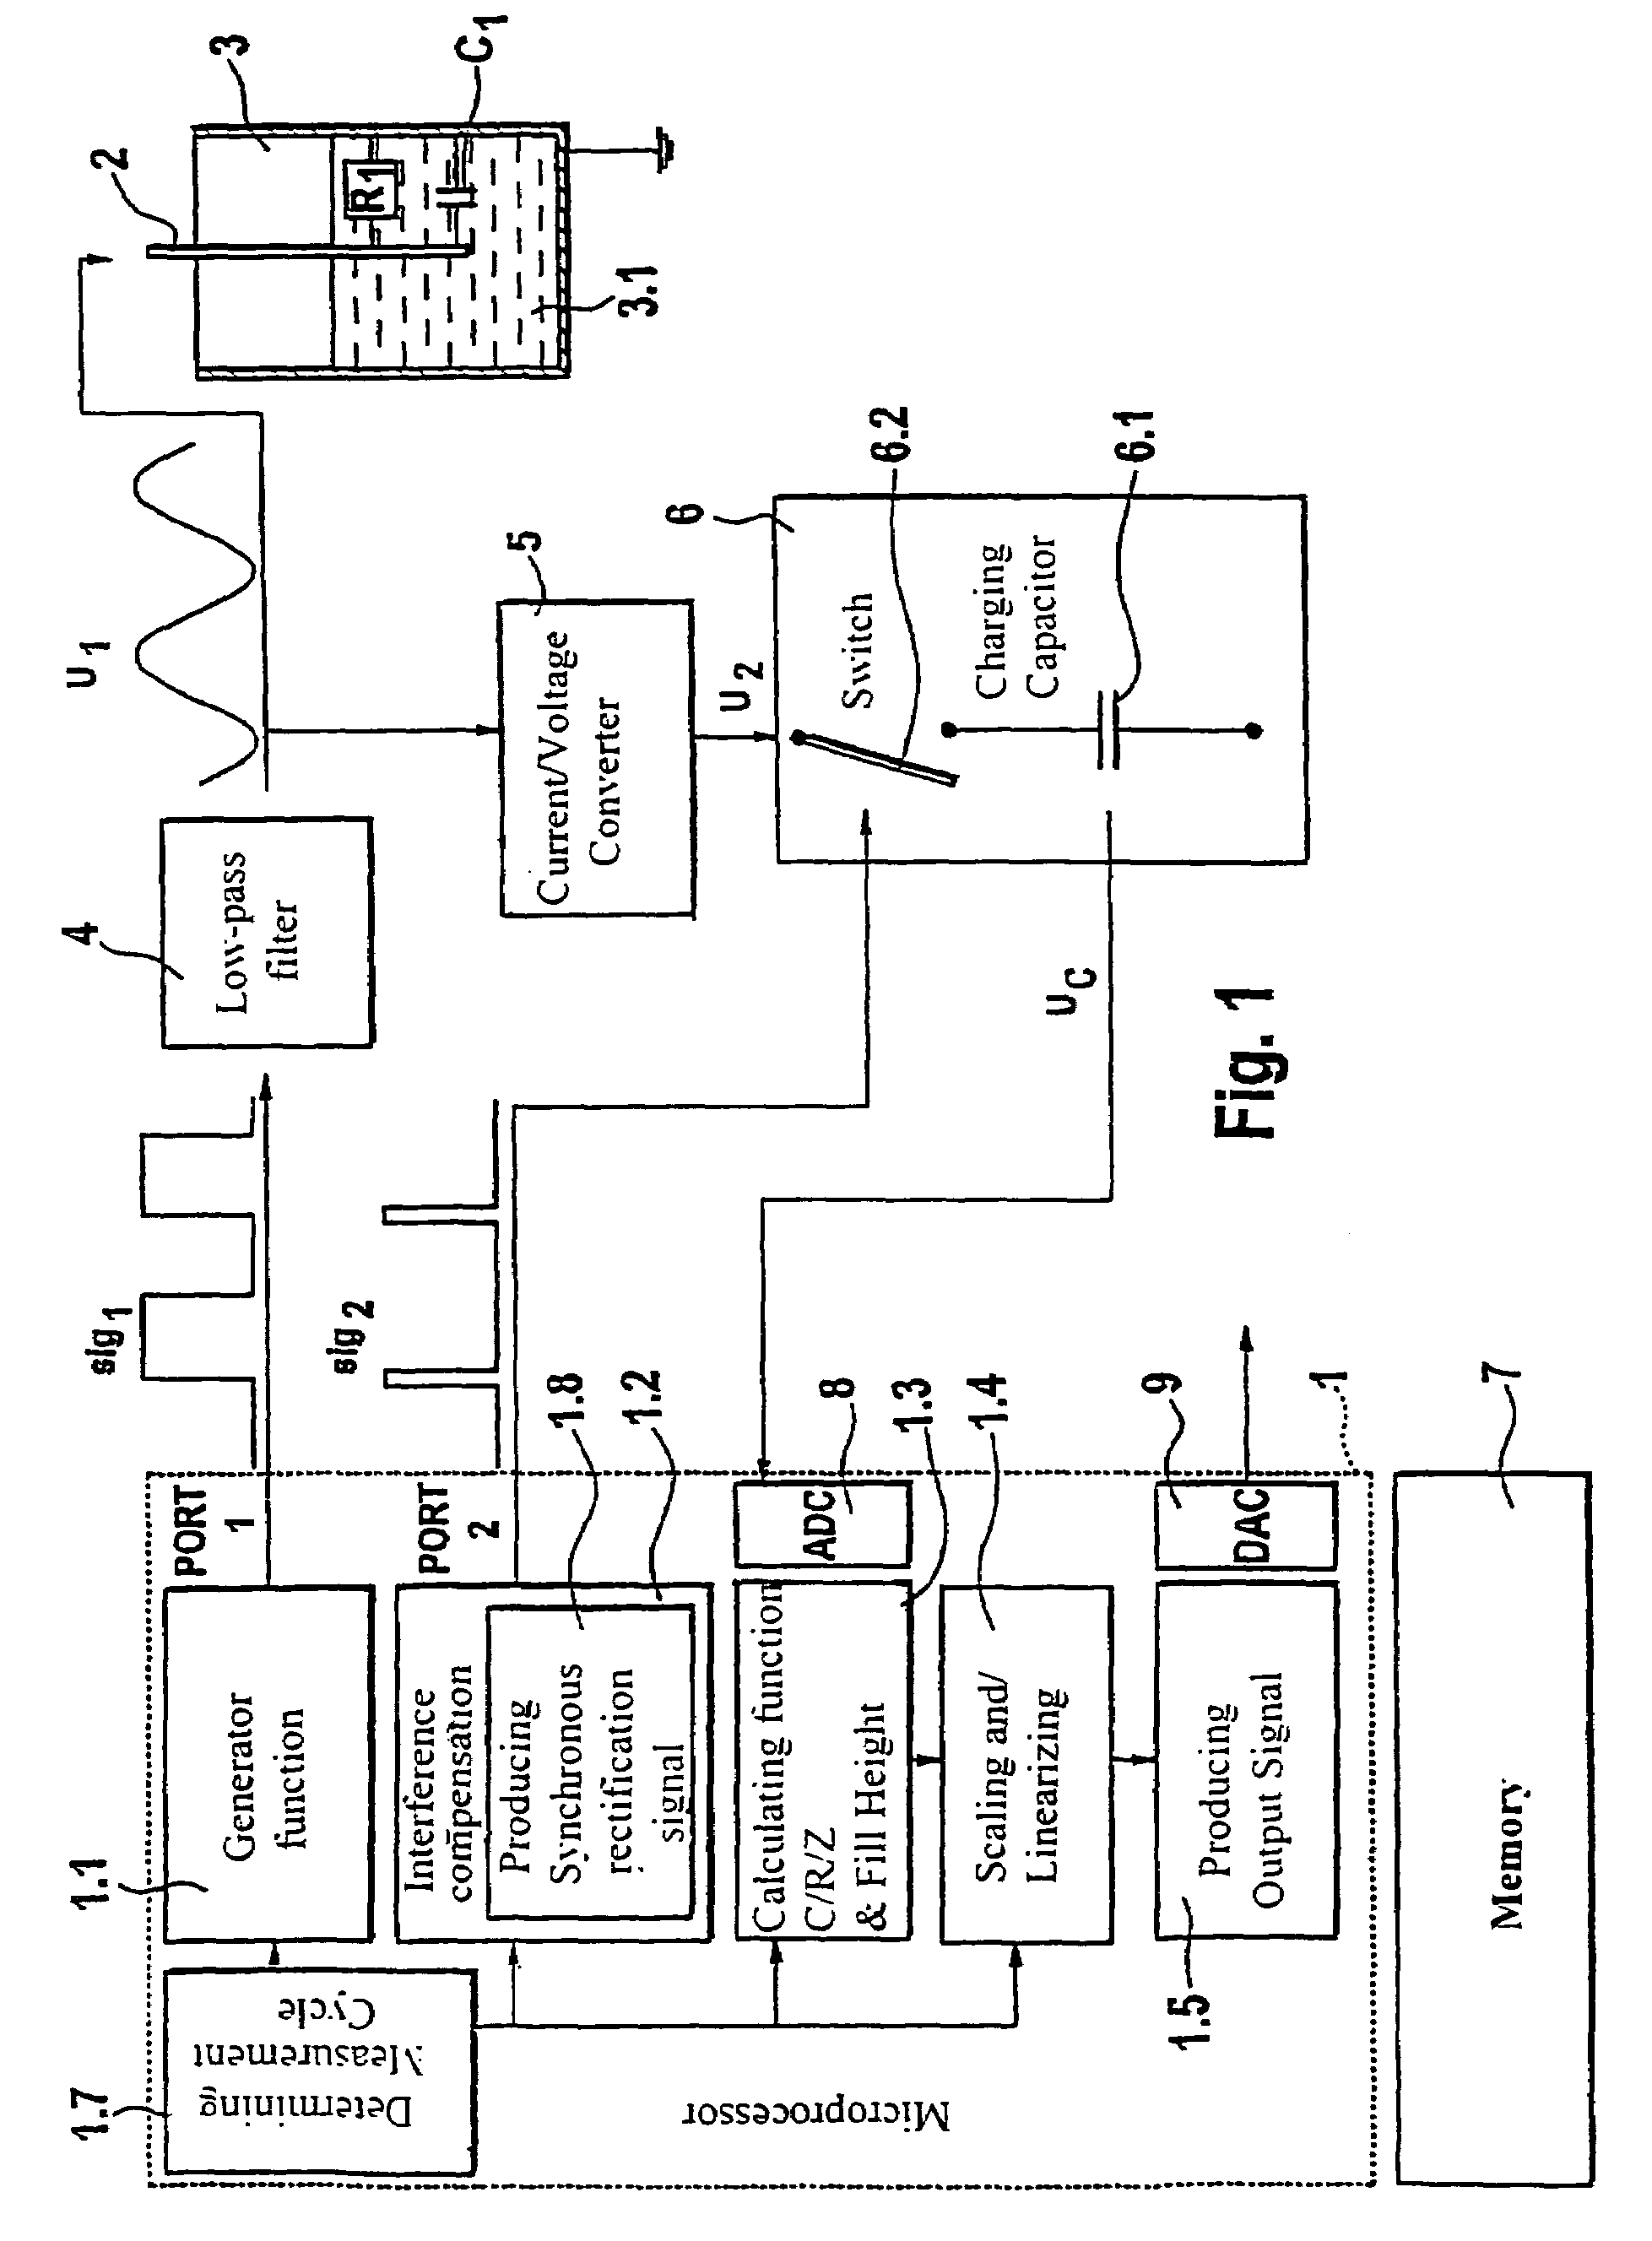 Electronic field device with a sensor unit for capacitive level measurement in a container